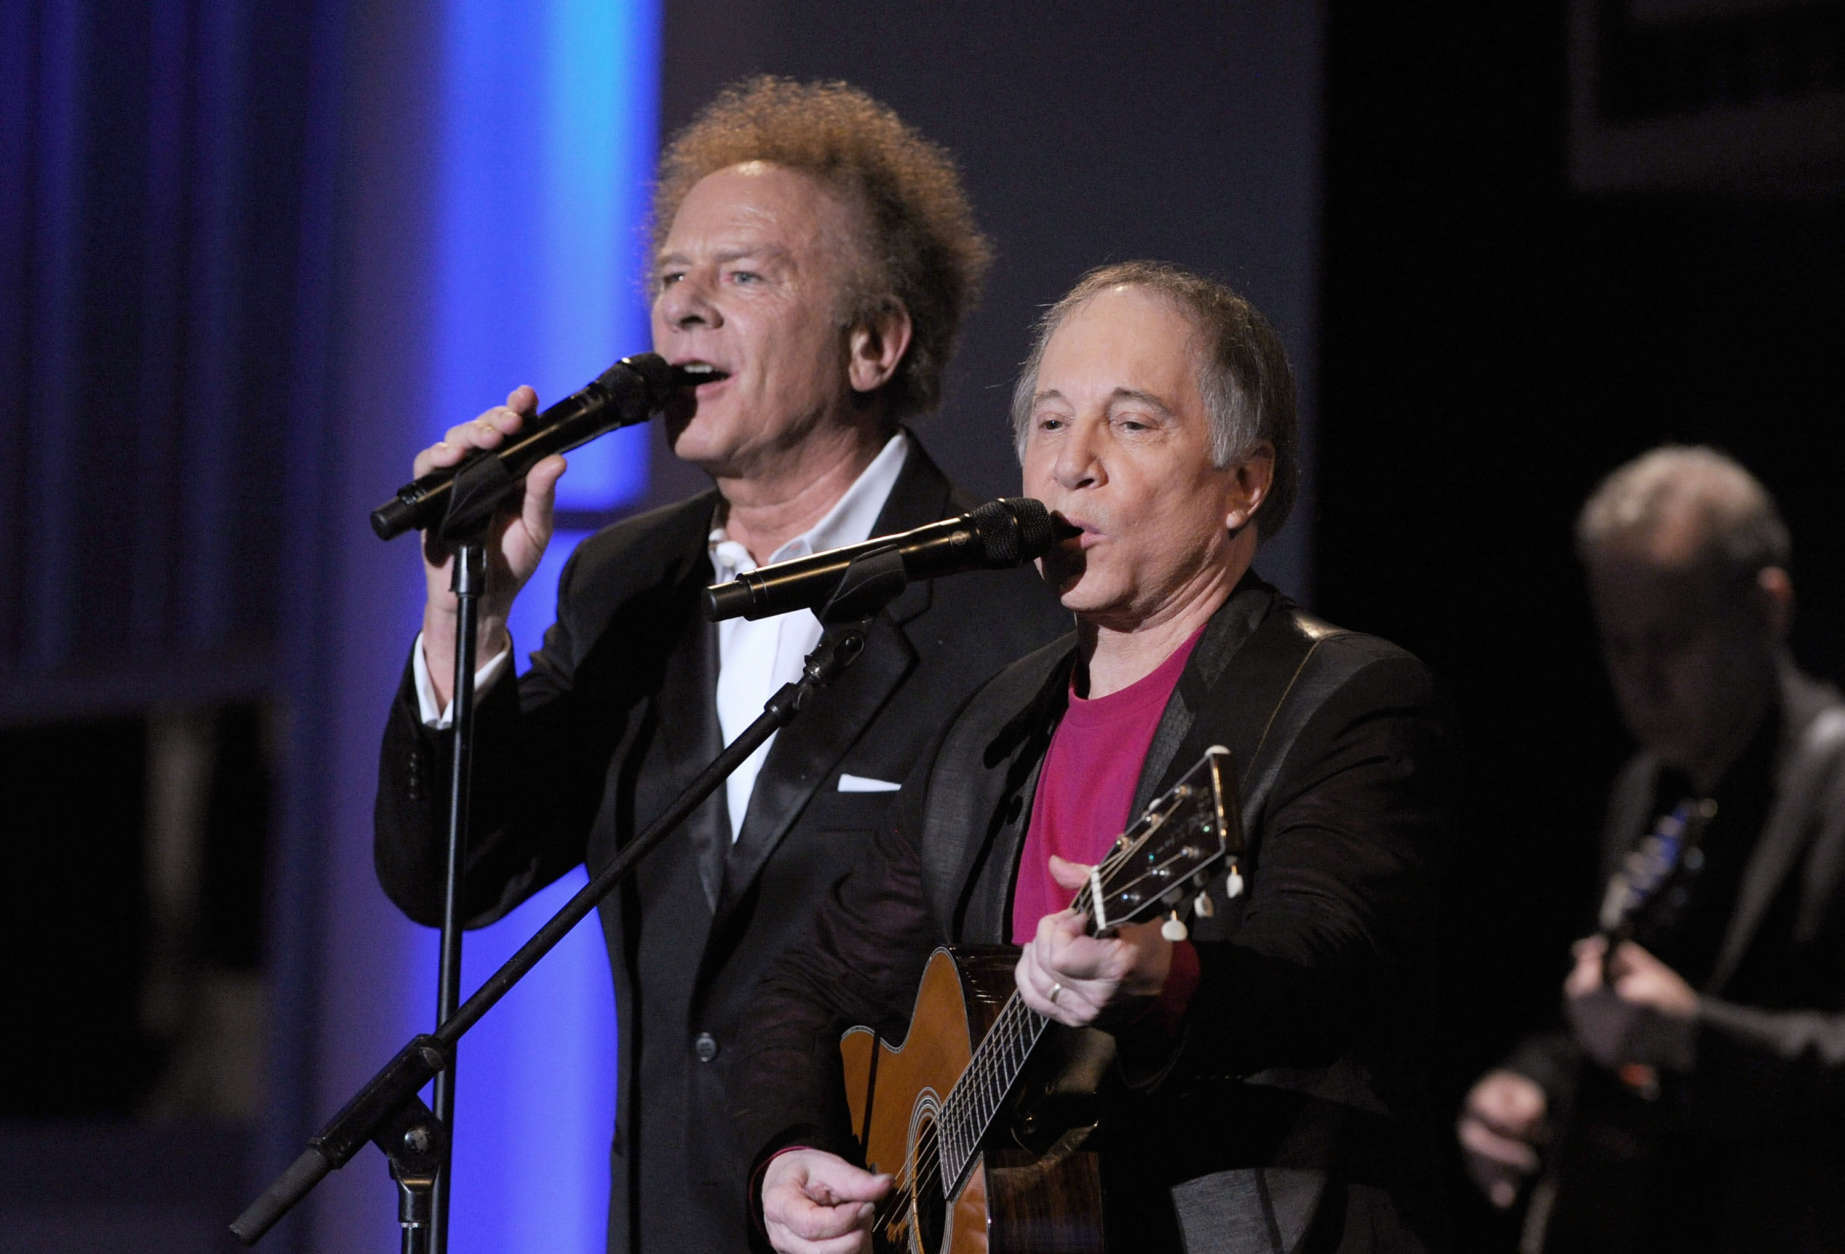 CULVER CITY, CA - JUNE 10:  Musicians Art Garfunkel and Paul Simon of Simon &amp; Garfunkel perform during the 38th AFI Life Achievement Award honoring Mike Nichols held at Sony Pictures Studios on June 10, 2010 in Culver City, California. The AFI Life Achievement Award tribute to Mike Nichols will premiere on TV Land on Saturday, June 25 at 9PM ET/PST.  (Photo by Frazer Harrison/Getty Images for AFI)